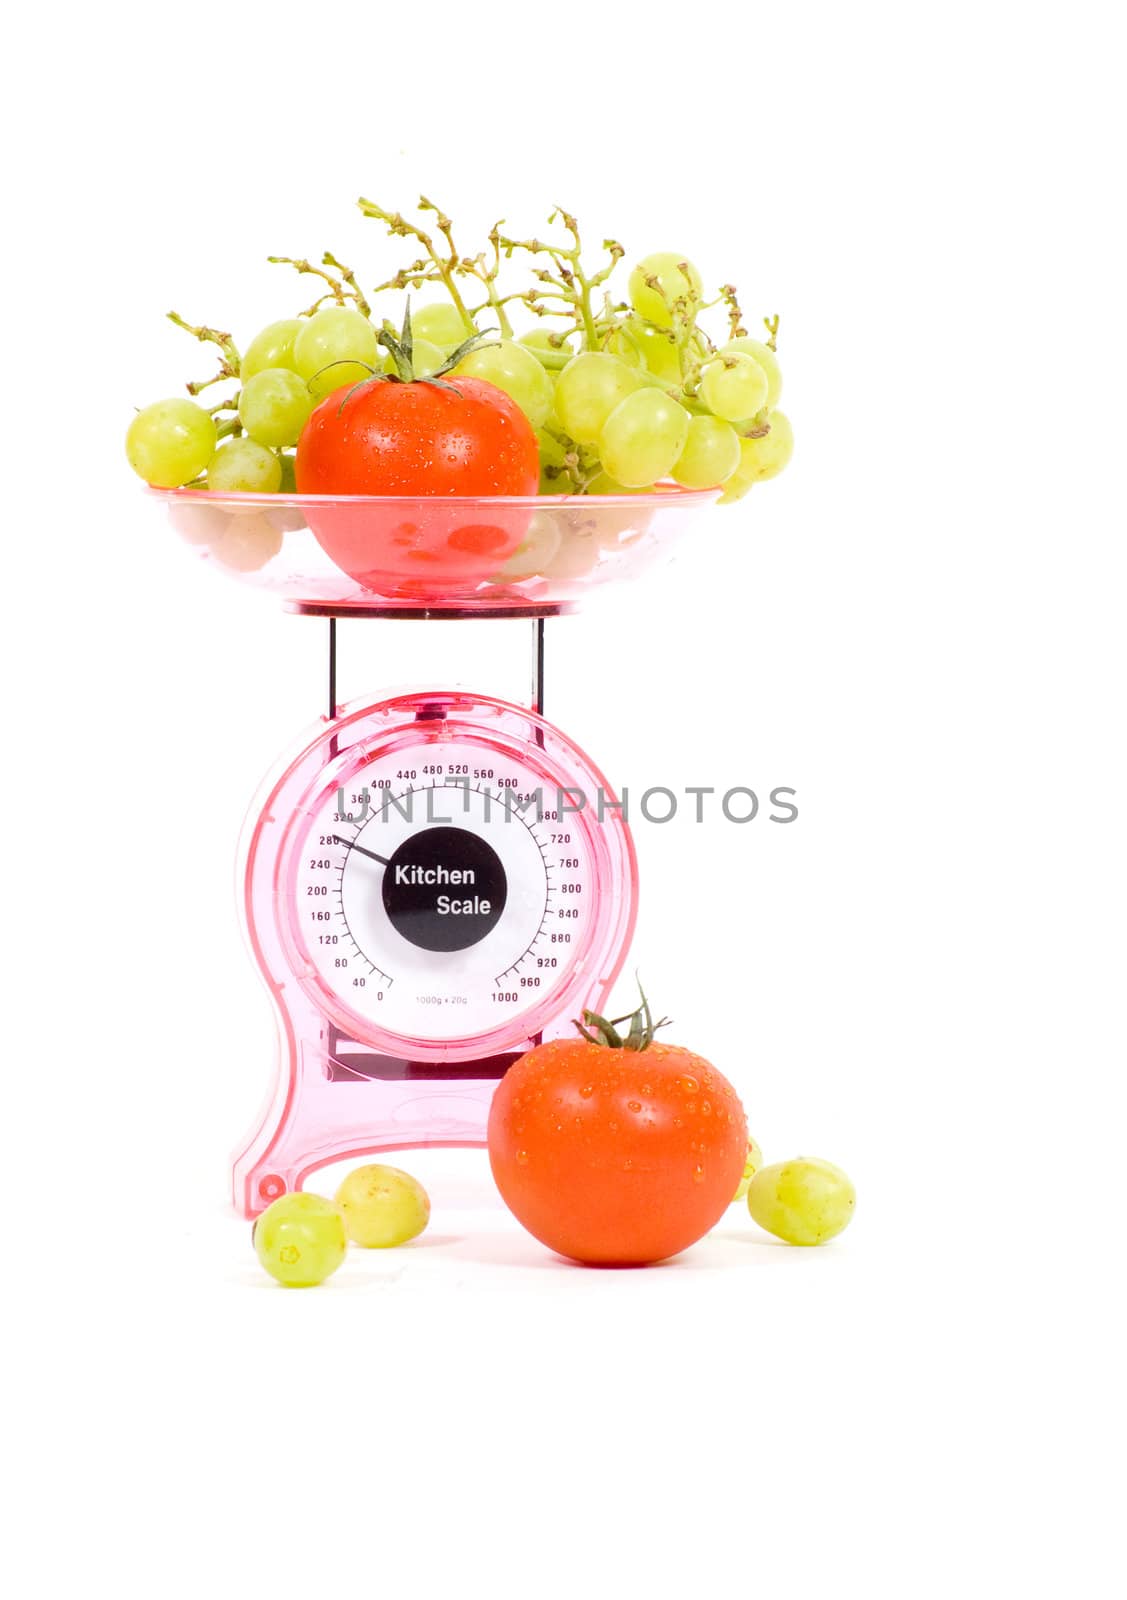 Kitchen Scales with tomatoes and grapes by ladyminnie